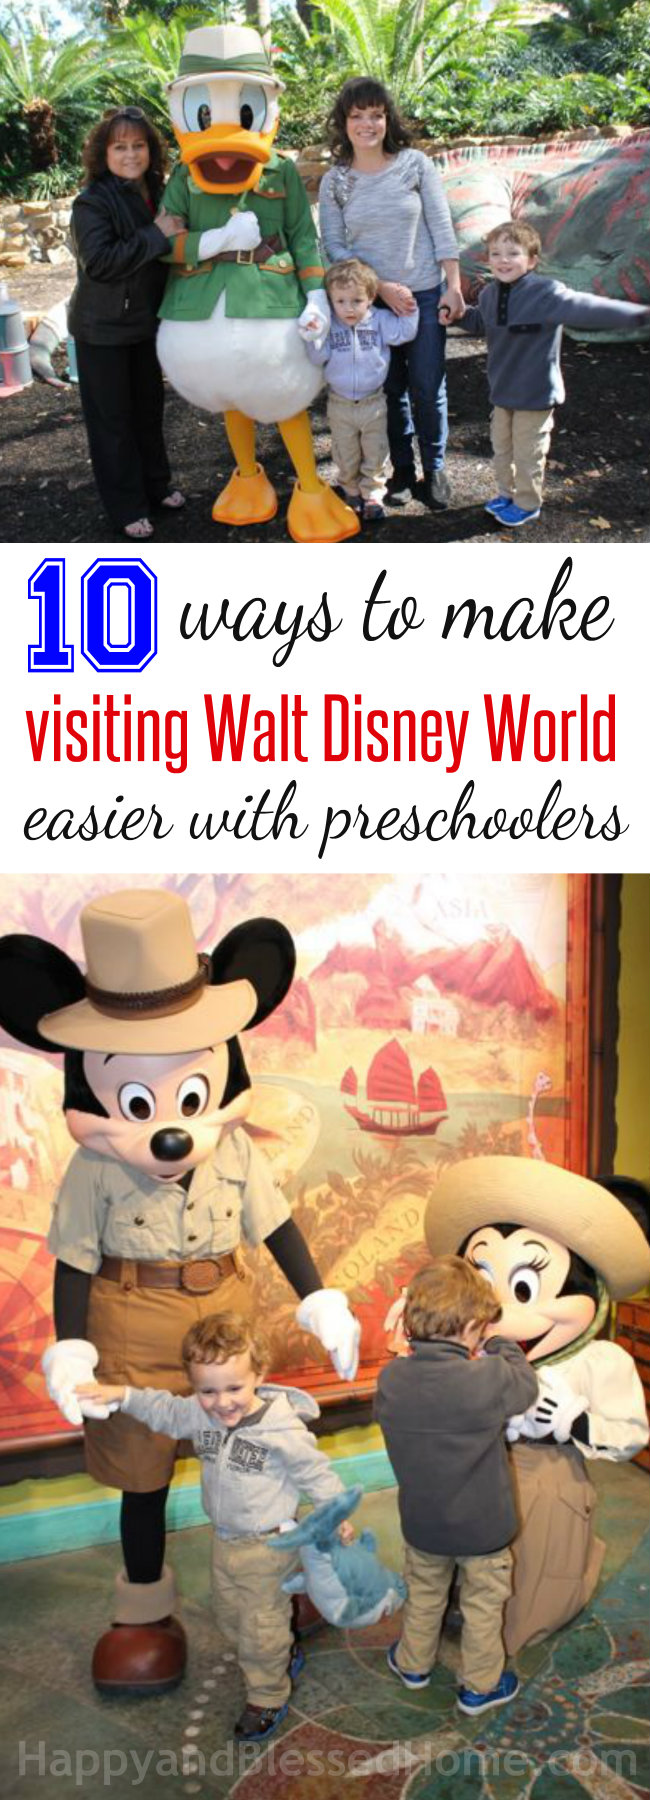 10 Ways to Make Visiting Walt Disney World easier with preschoolers and free stroller tags from HappyandBlessedHome.com